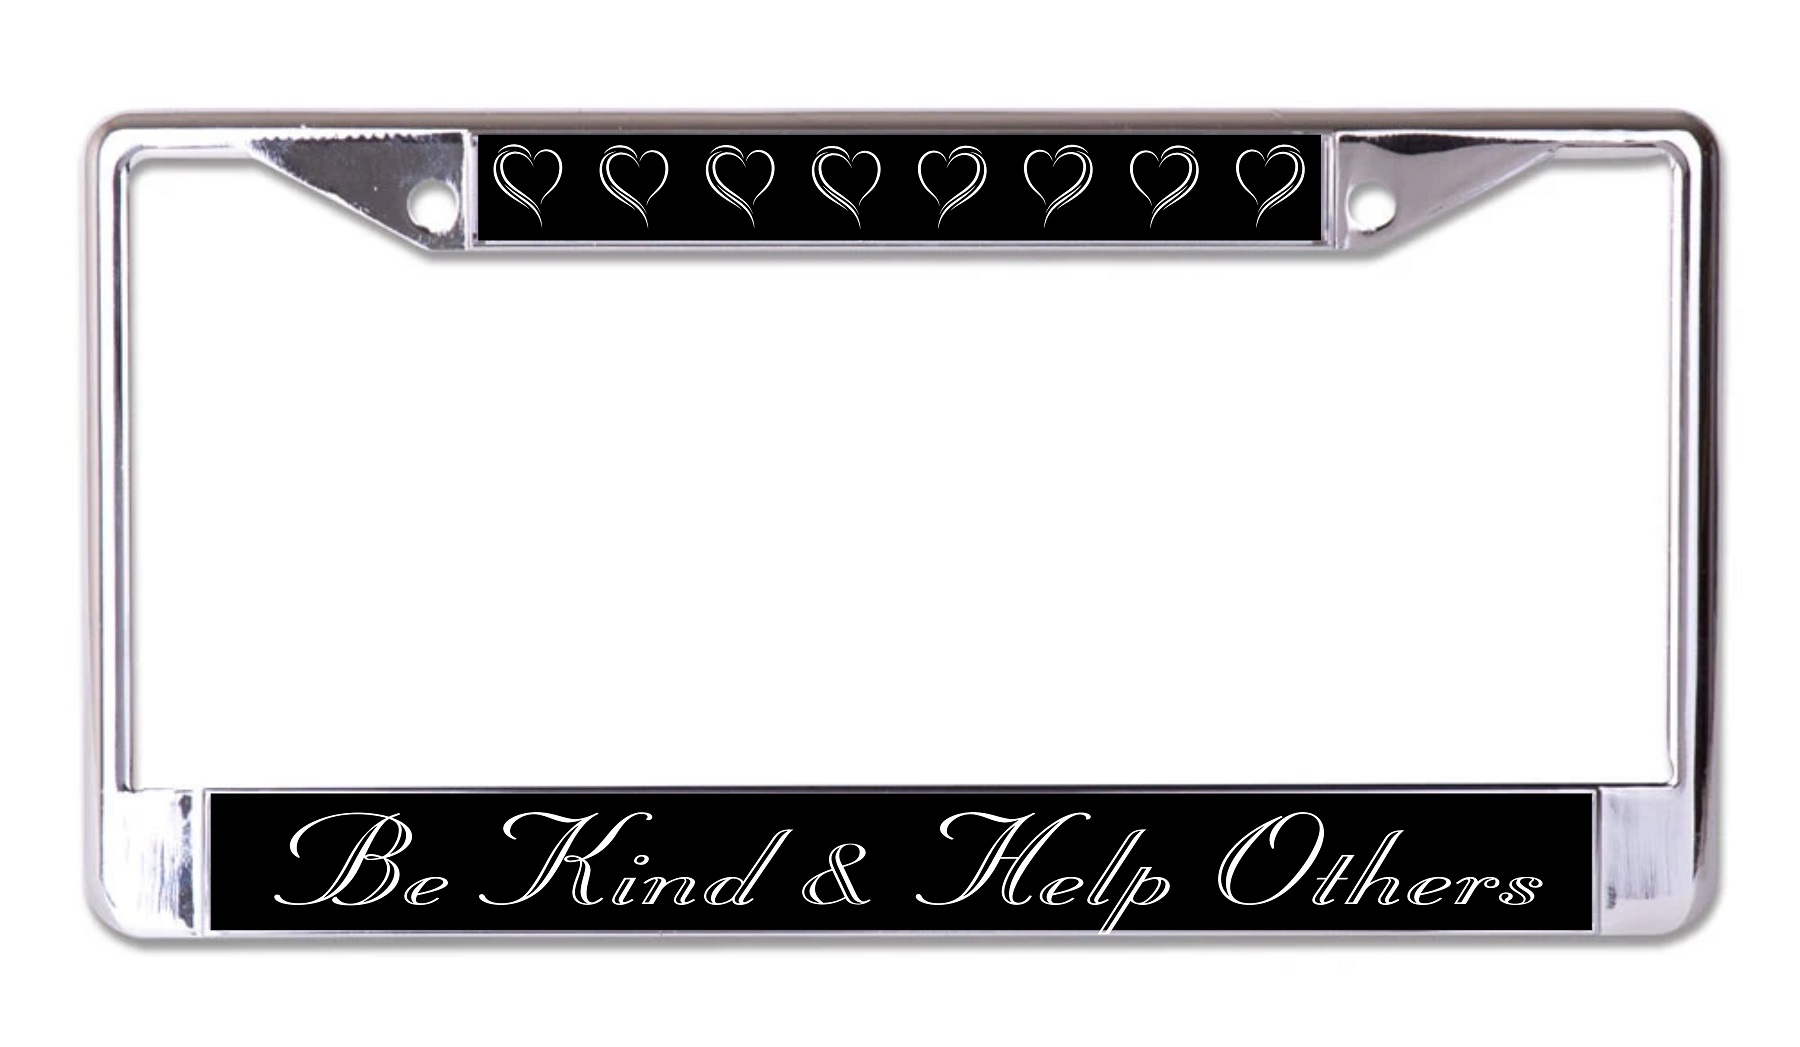 Be Kind And Help Others Chrome LICENSE PLATE Frame